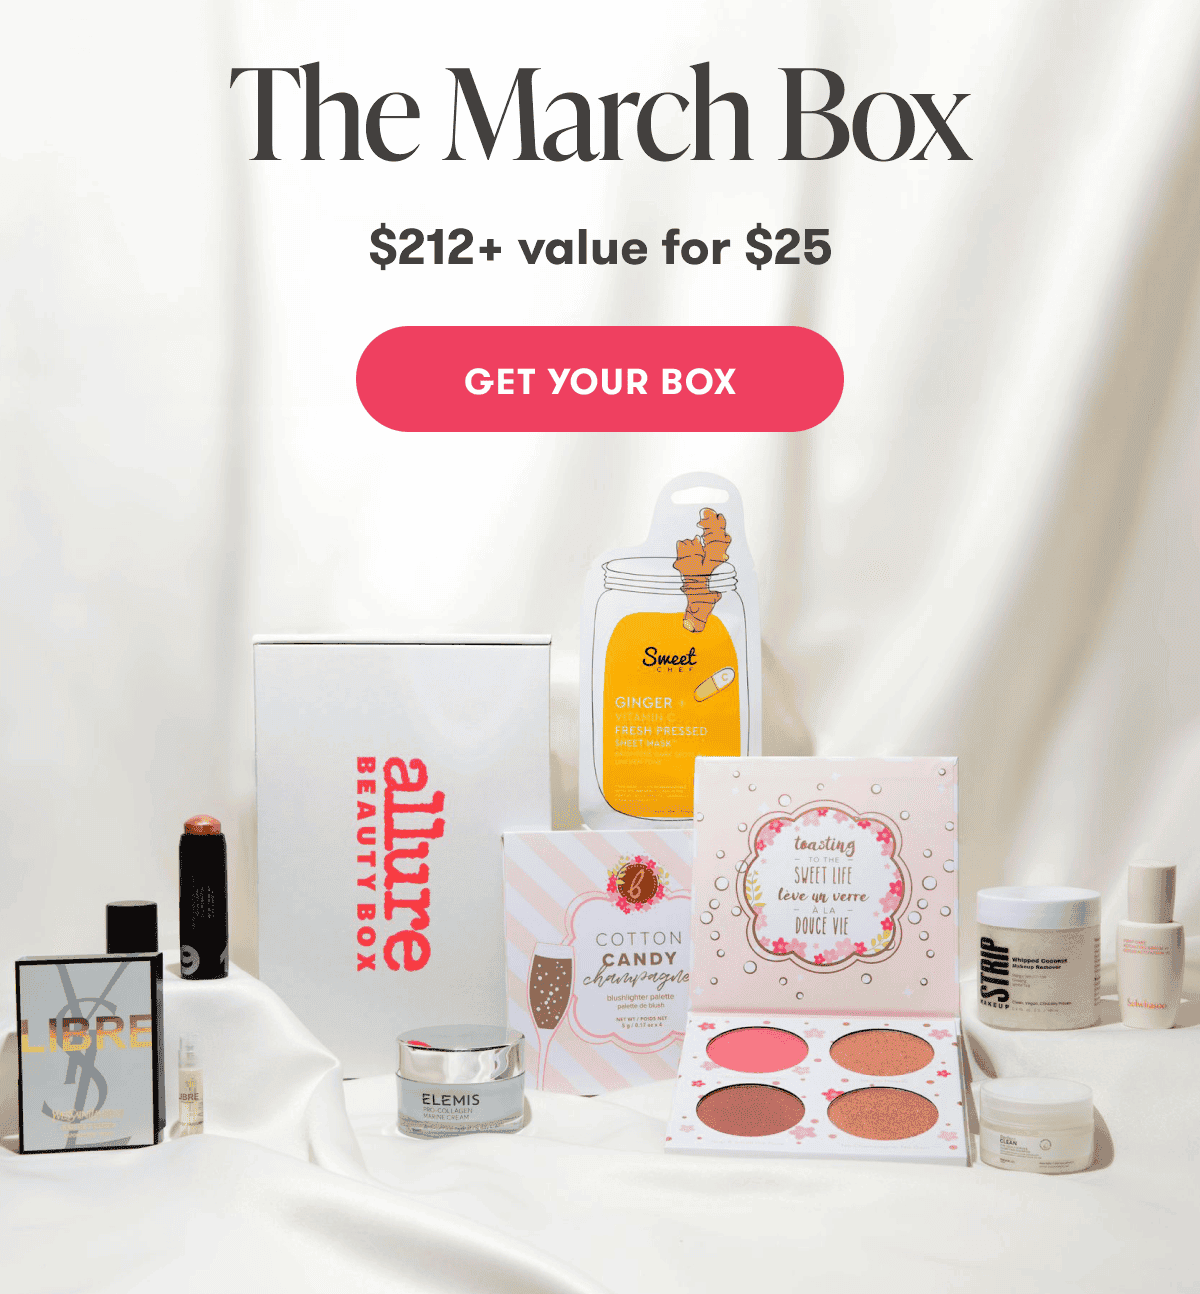 The March Box. \\$212+ value for \\$25. Get your box.